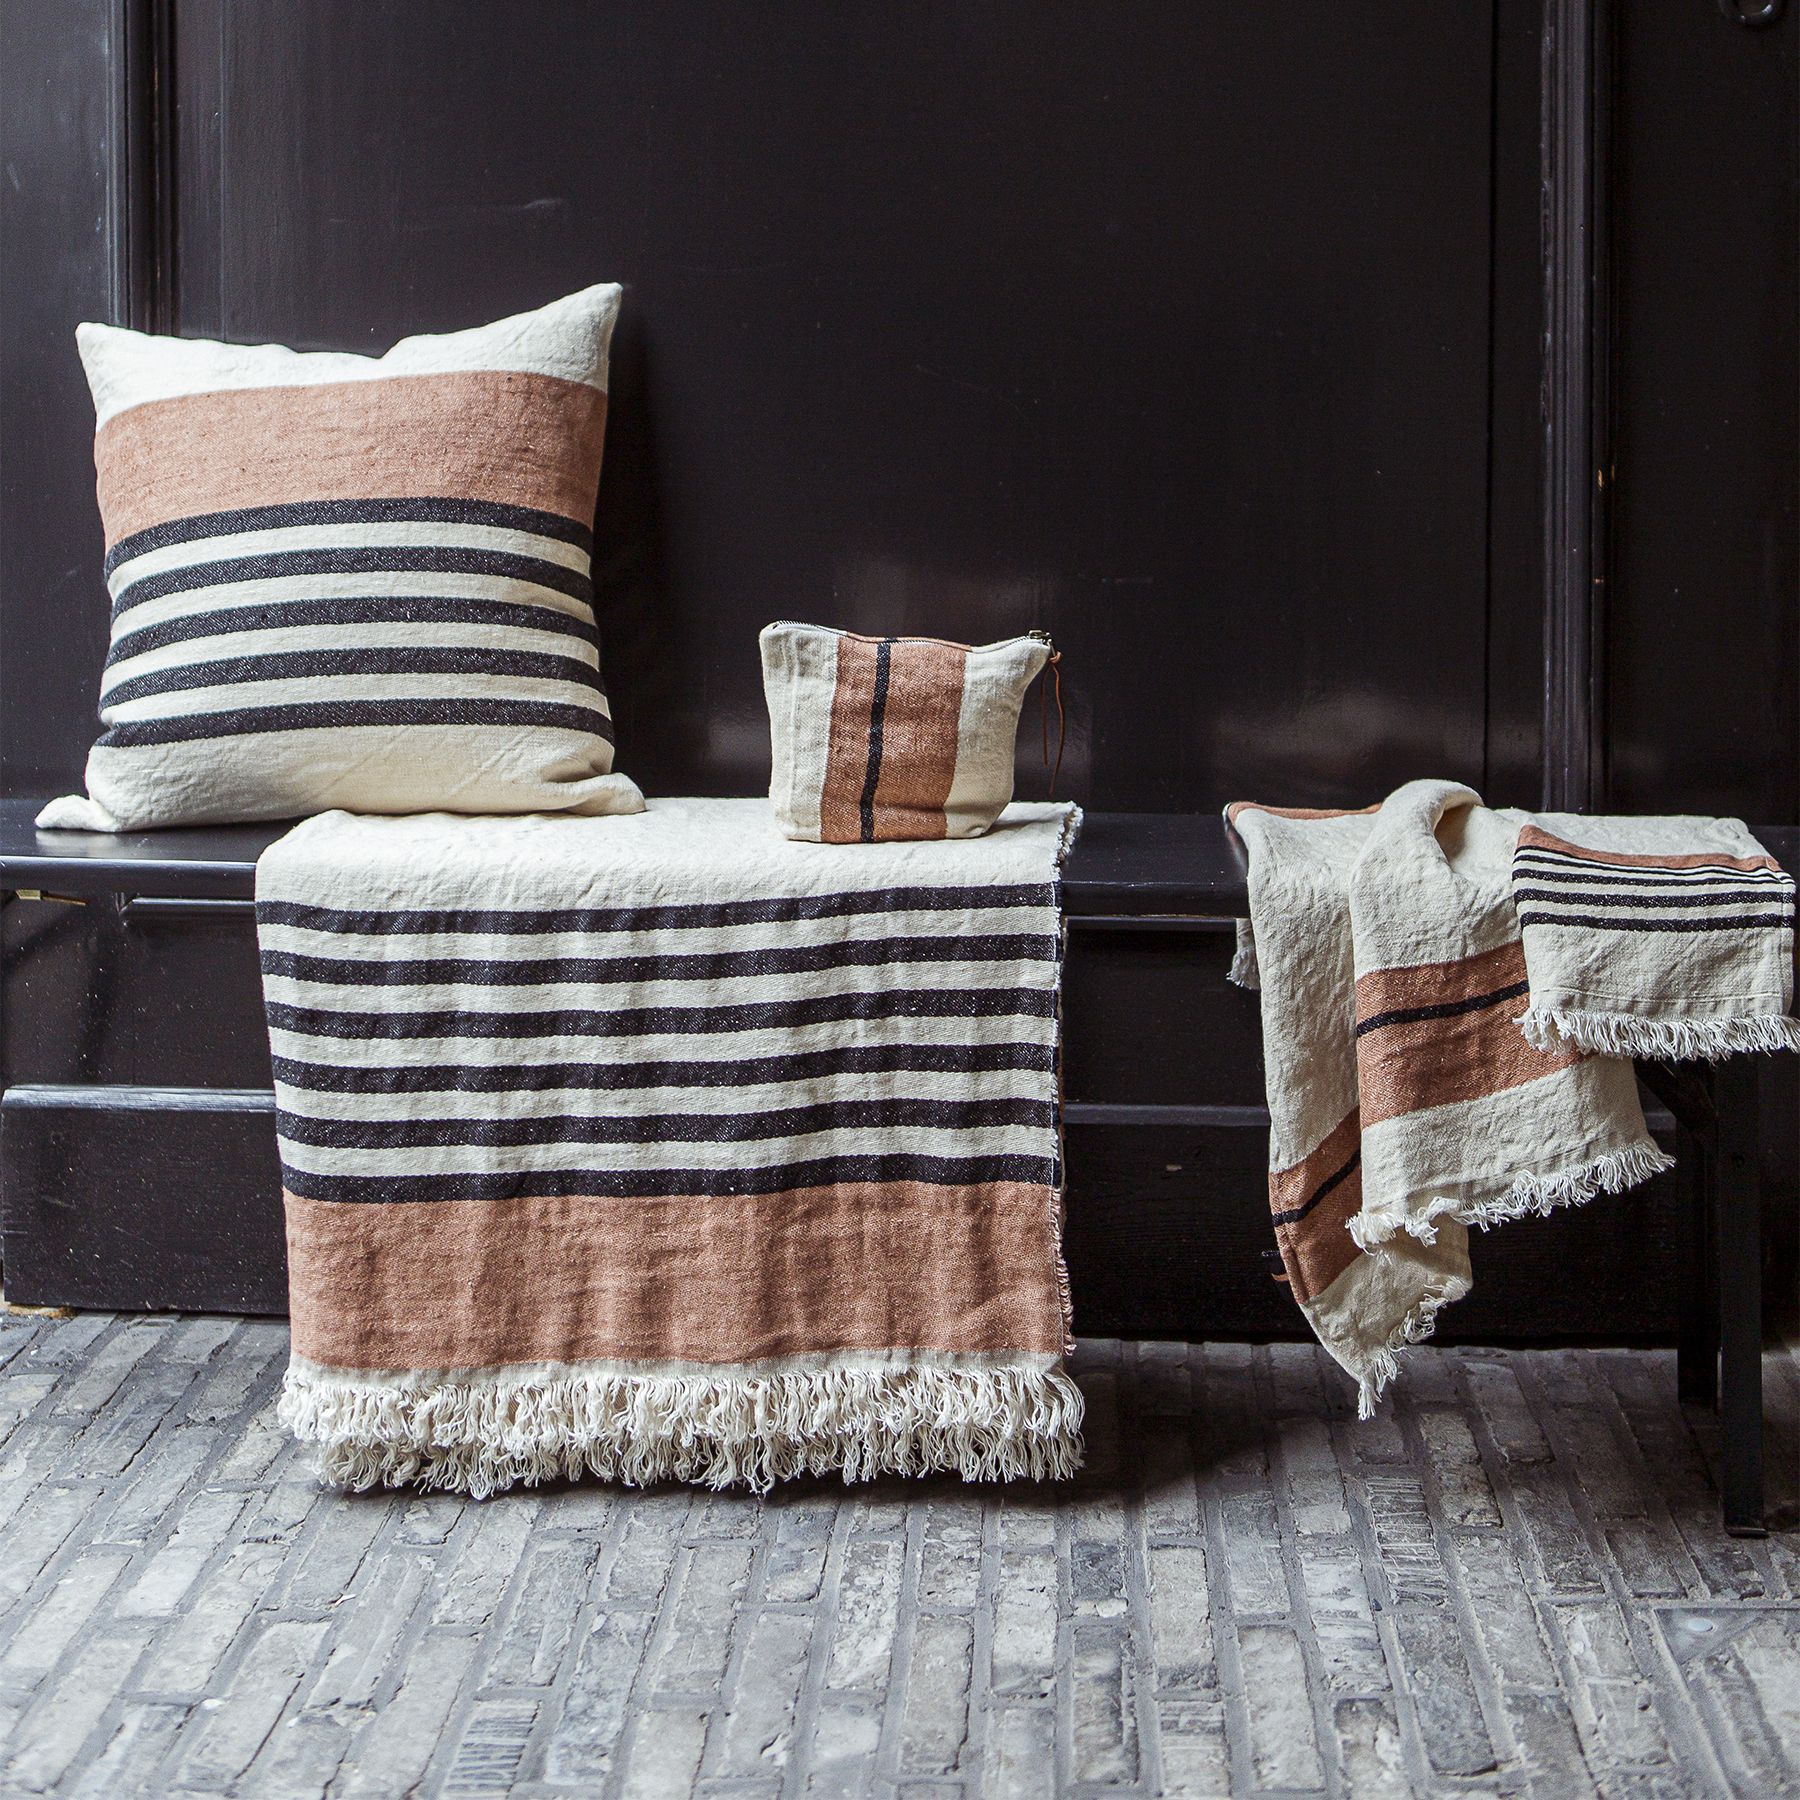 the inyo collection of Belgian linen pillow covers and towels